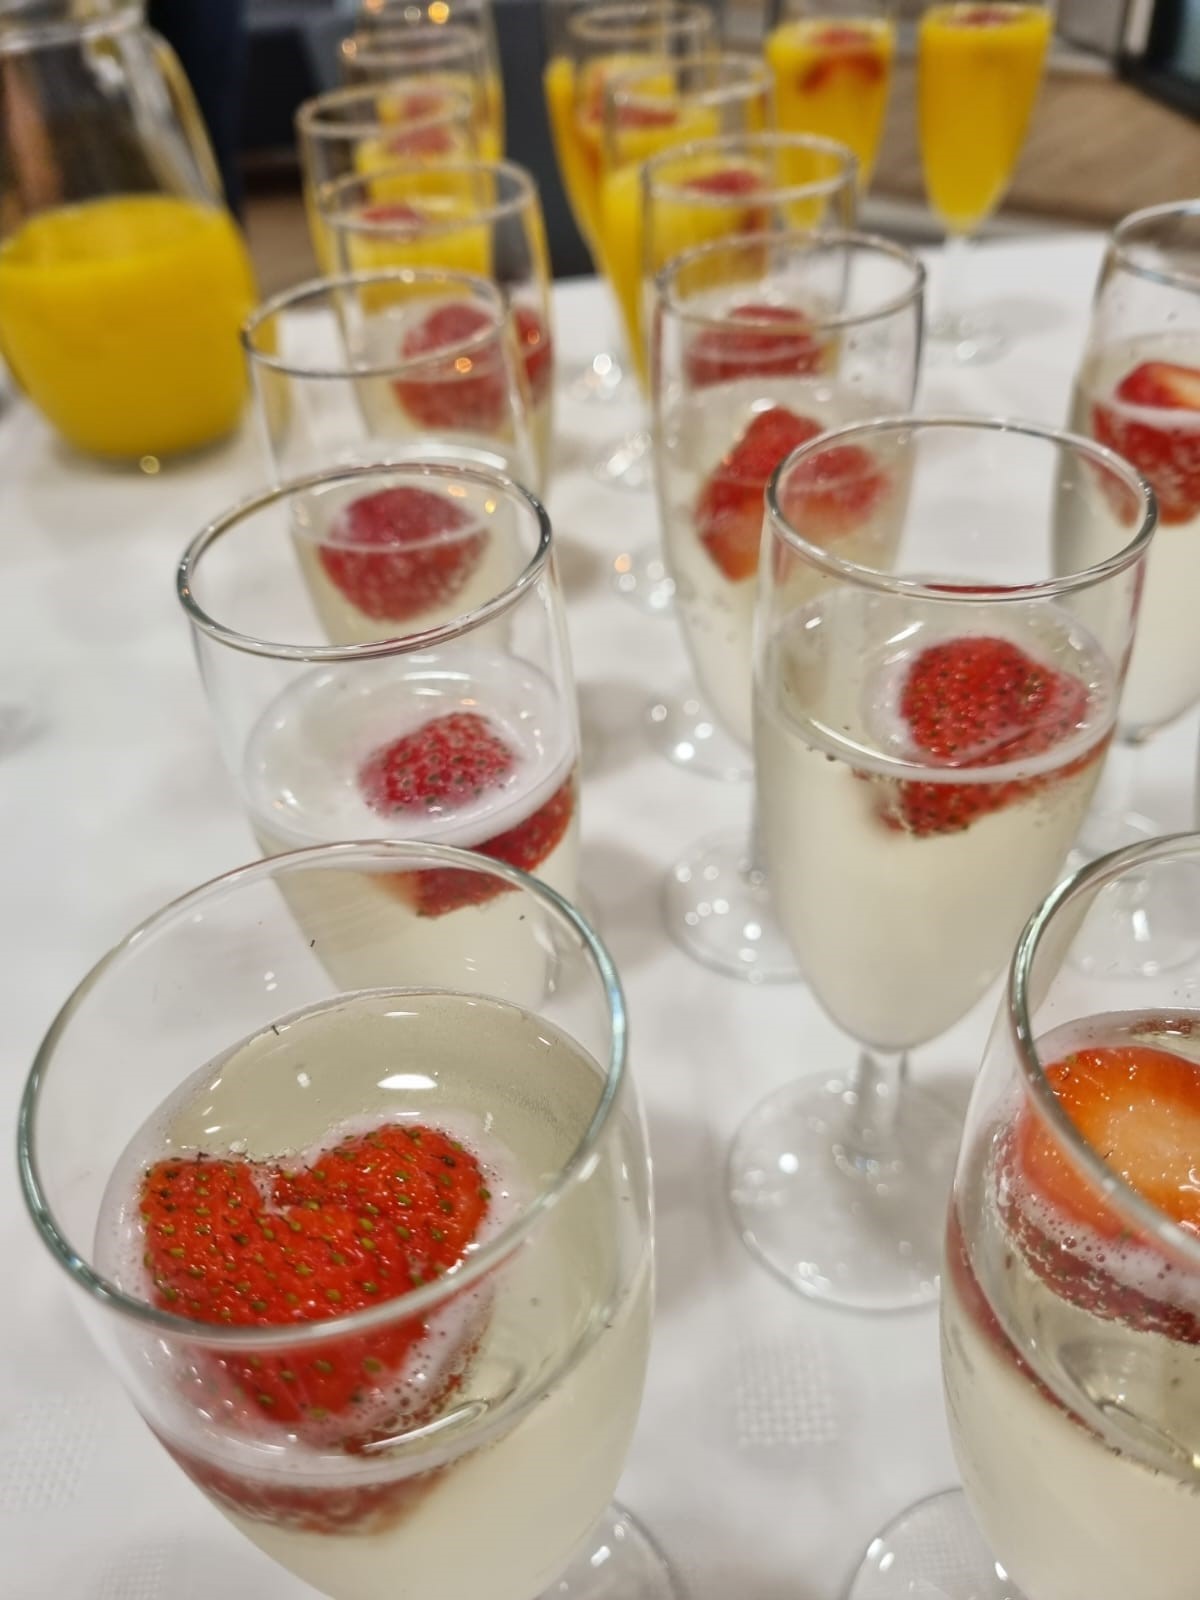 Glasses of bubbles for Christchurch Derma Spa AlumierMD VIP party